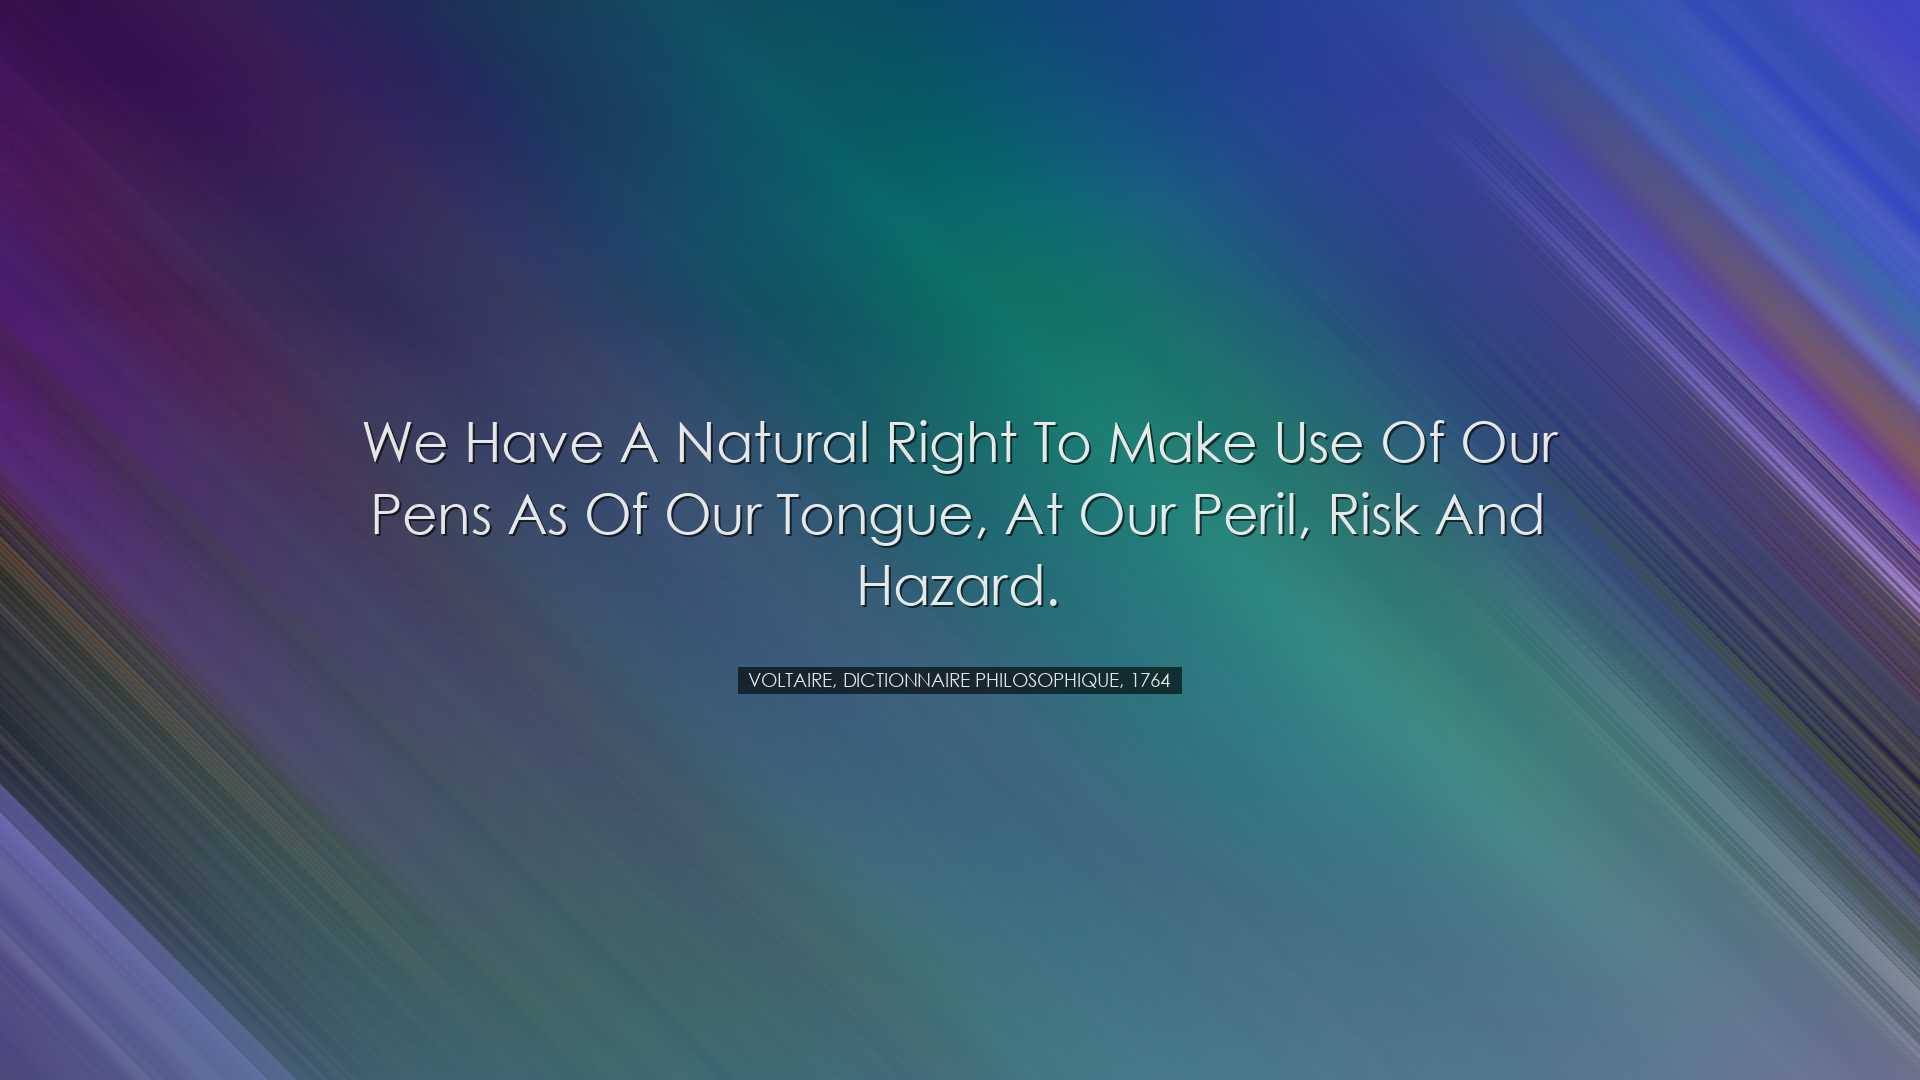 We have a natural right to make use of our pens as of our tongue,